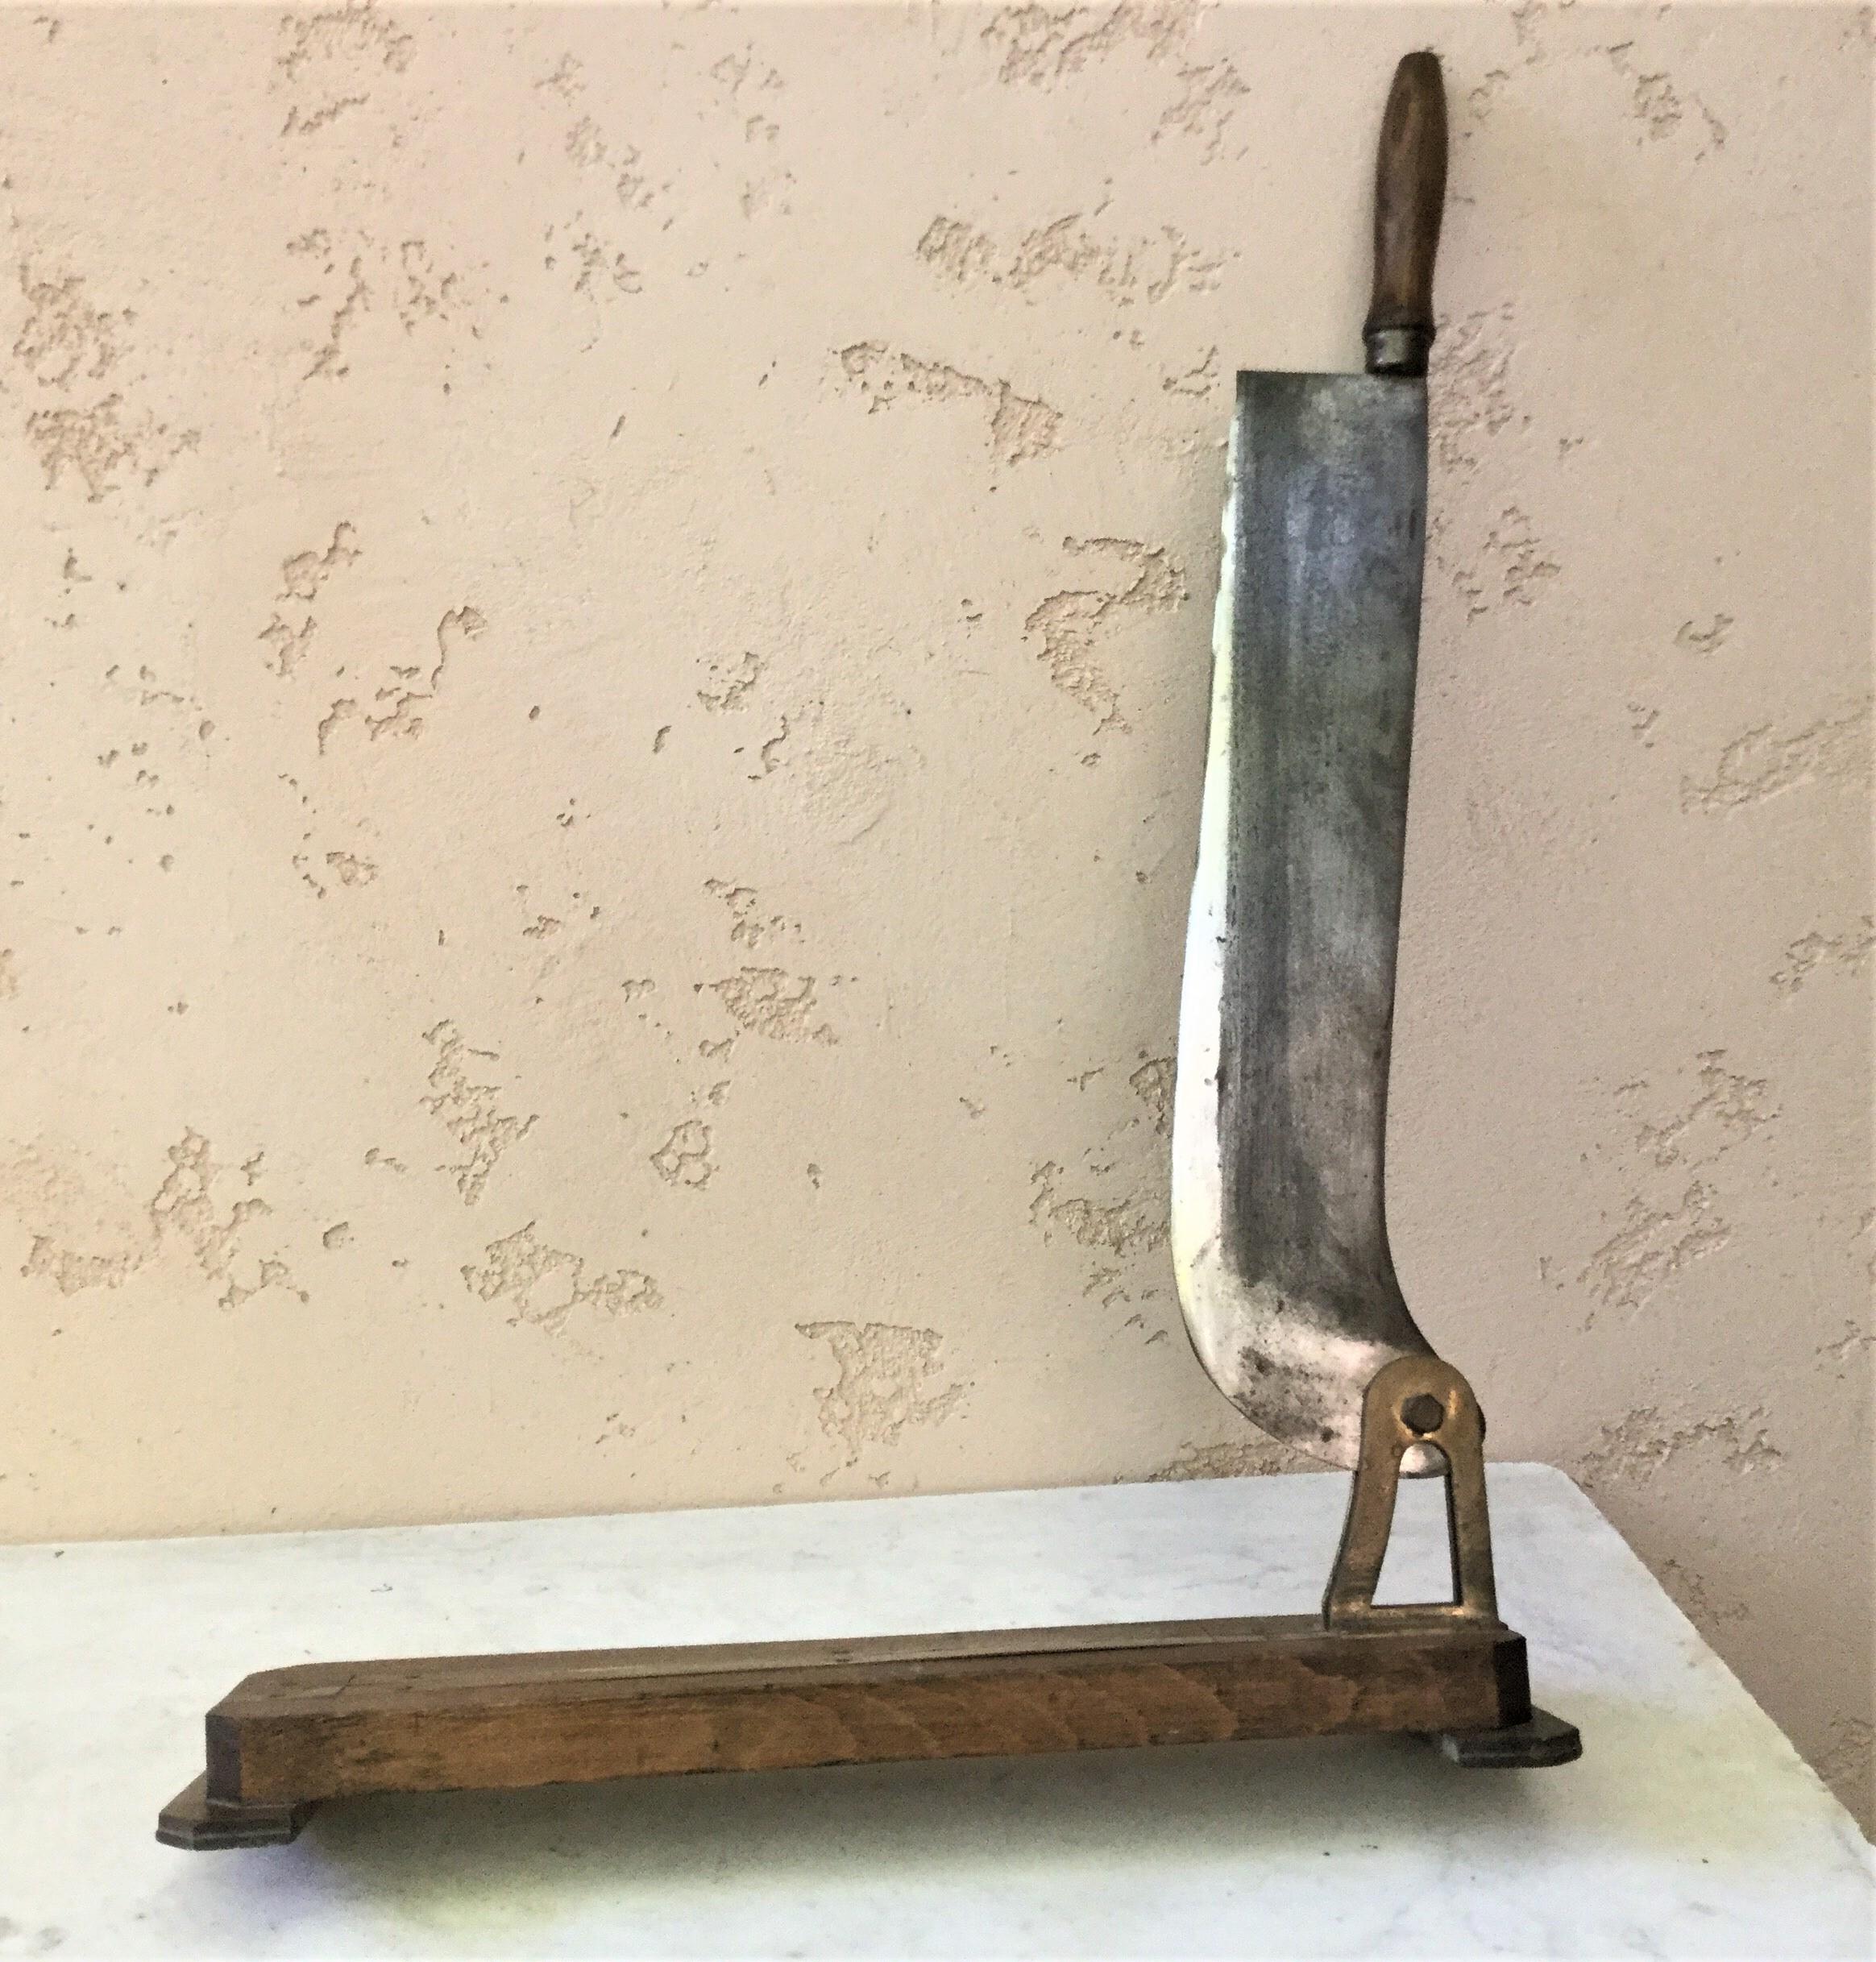 Large French wood, iron and copper bakery bread cutter, circa 1900.
The metal piece is signed RIVA.